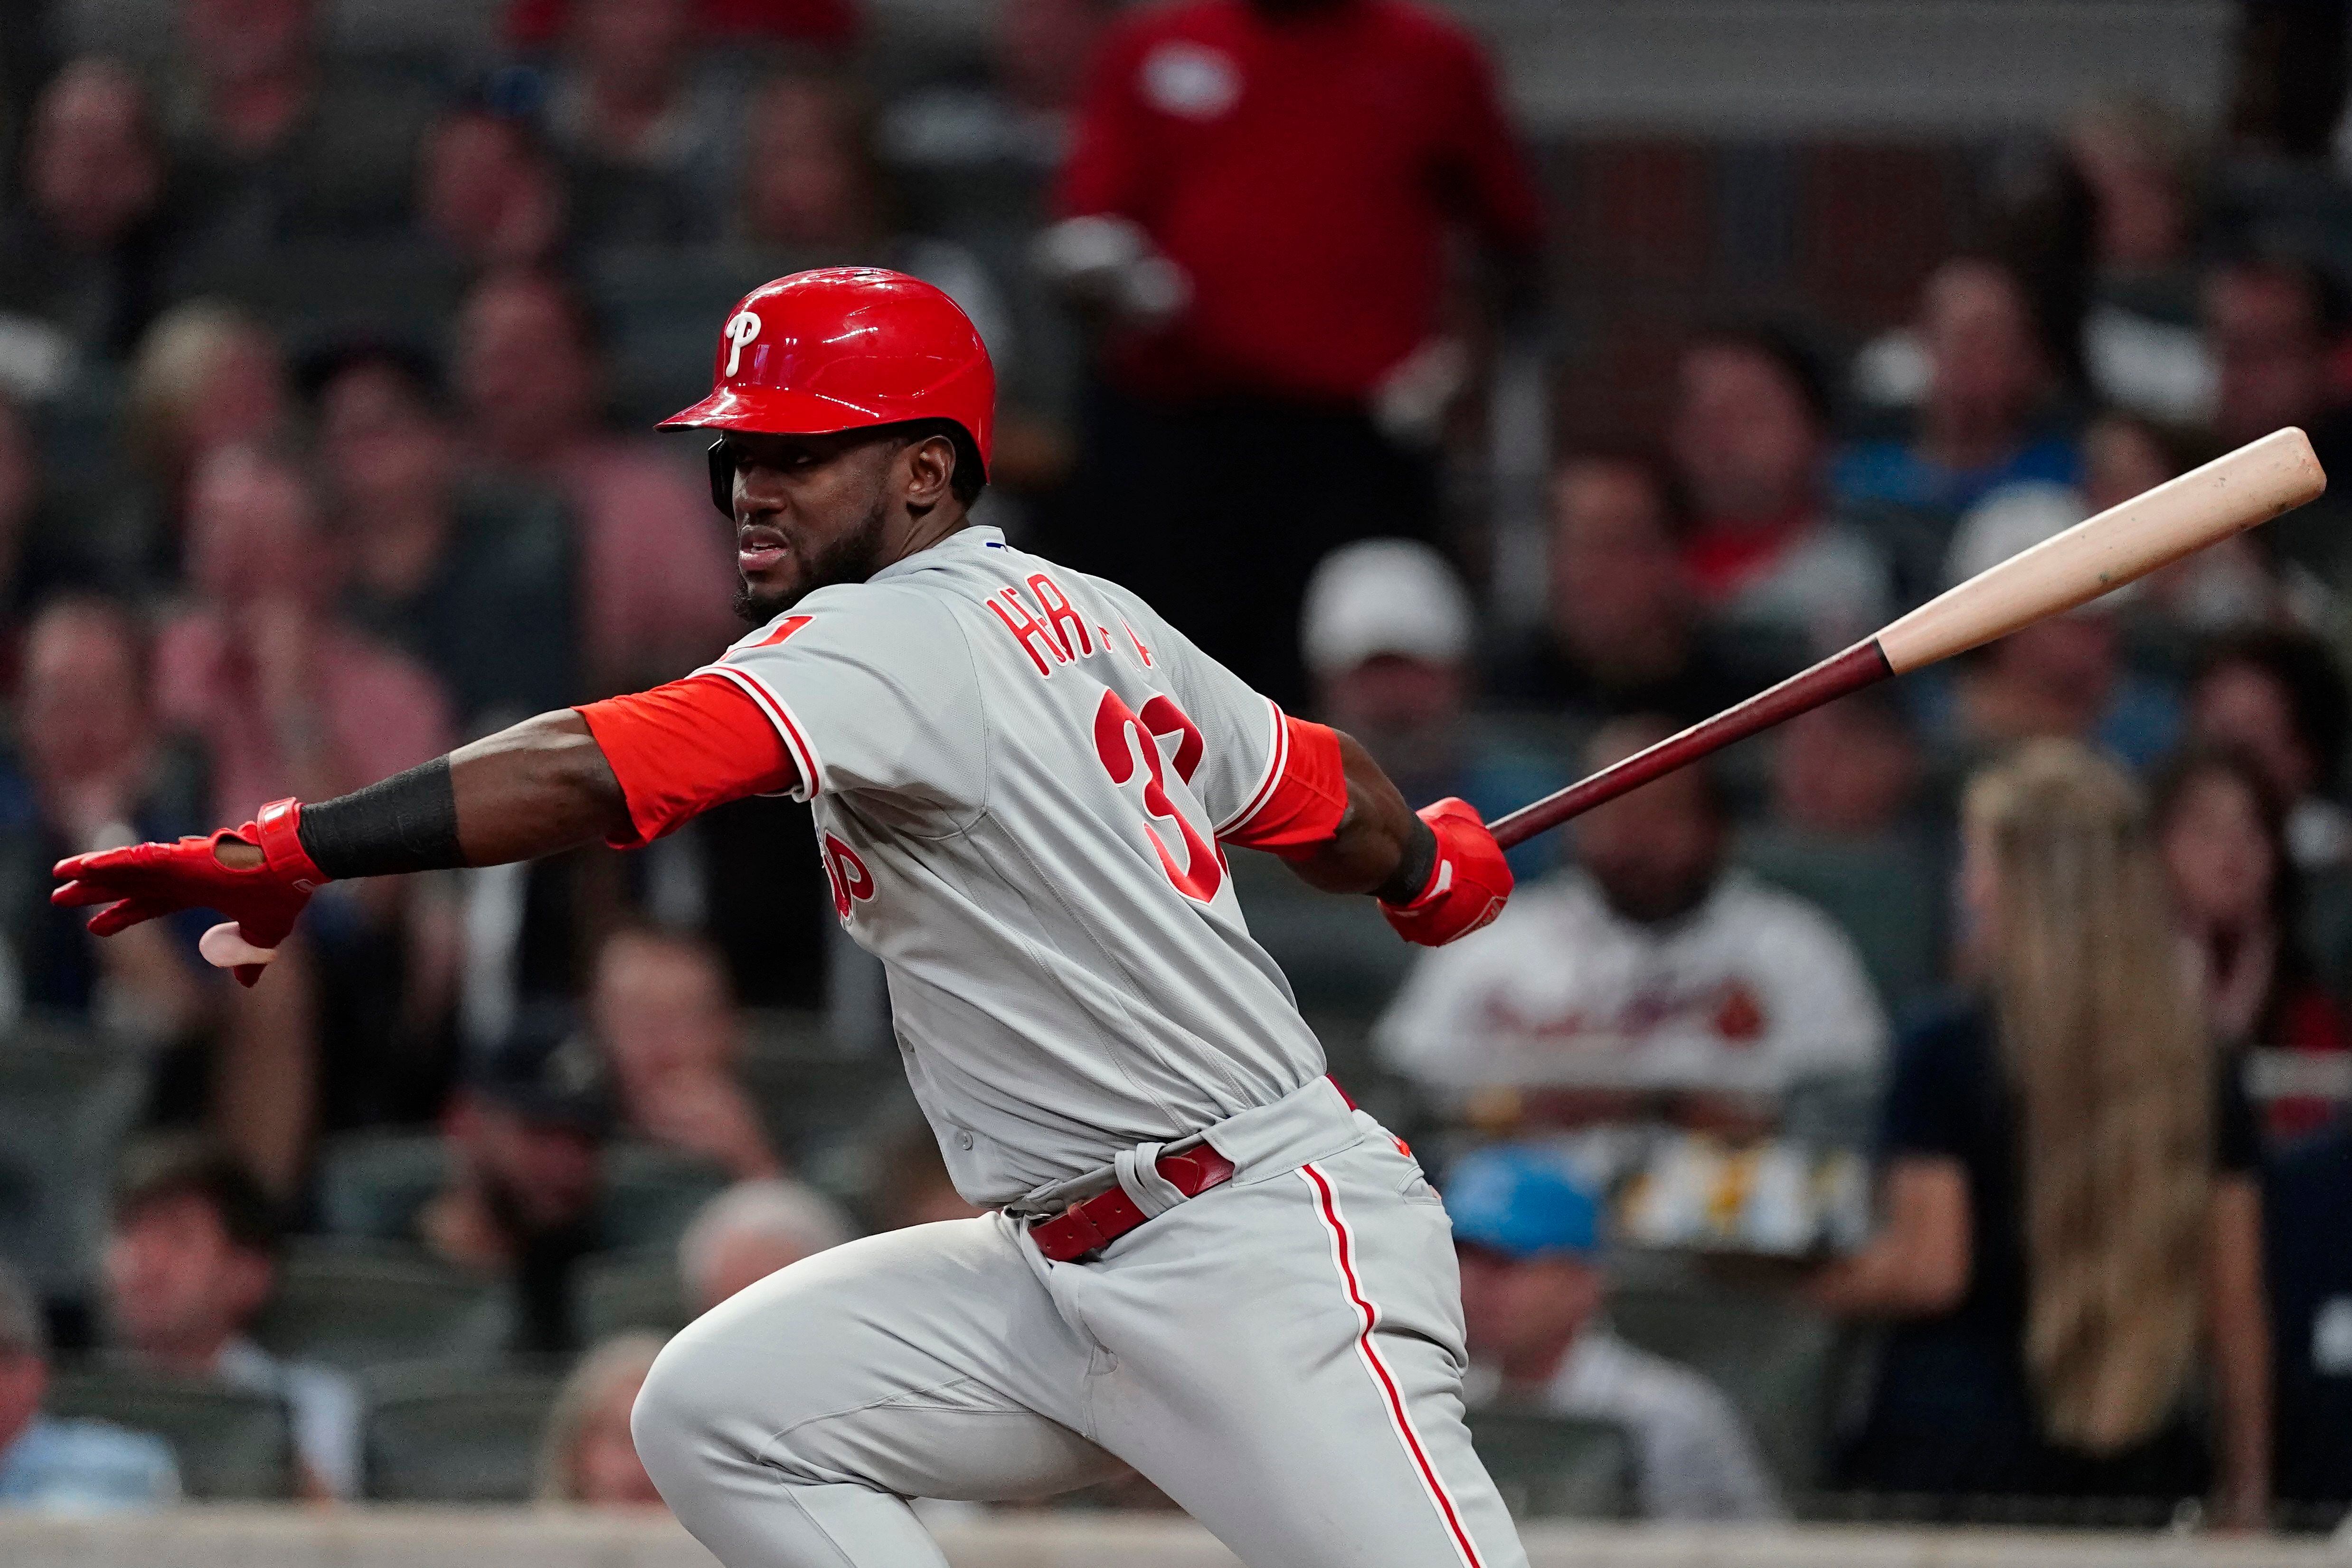 Phillies Nuggets: Did Odubel Herrera get snubbed for the All-Star Game?   Phillies Nation - Your source for Philadelphia Phillies news, opinion,  history, rumors, events, and other fun stuff.